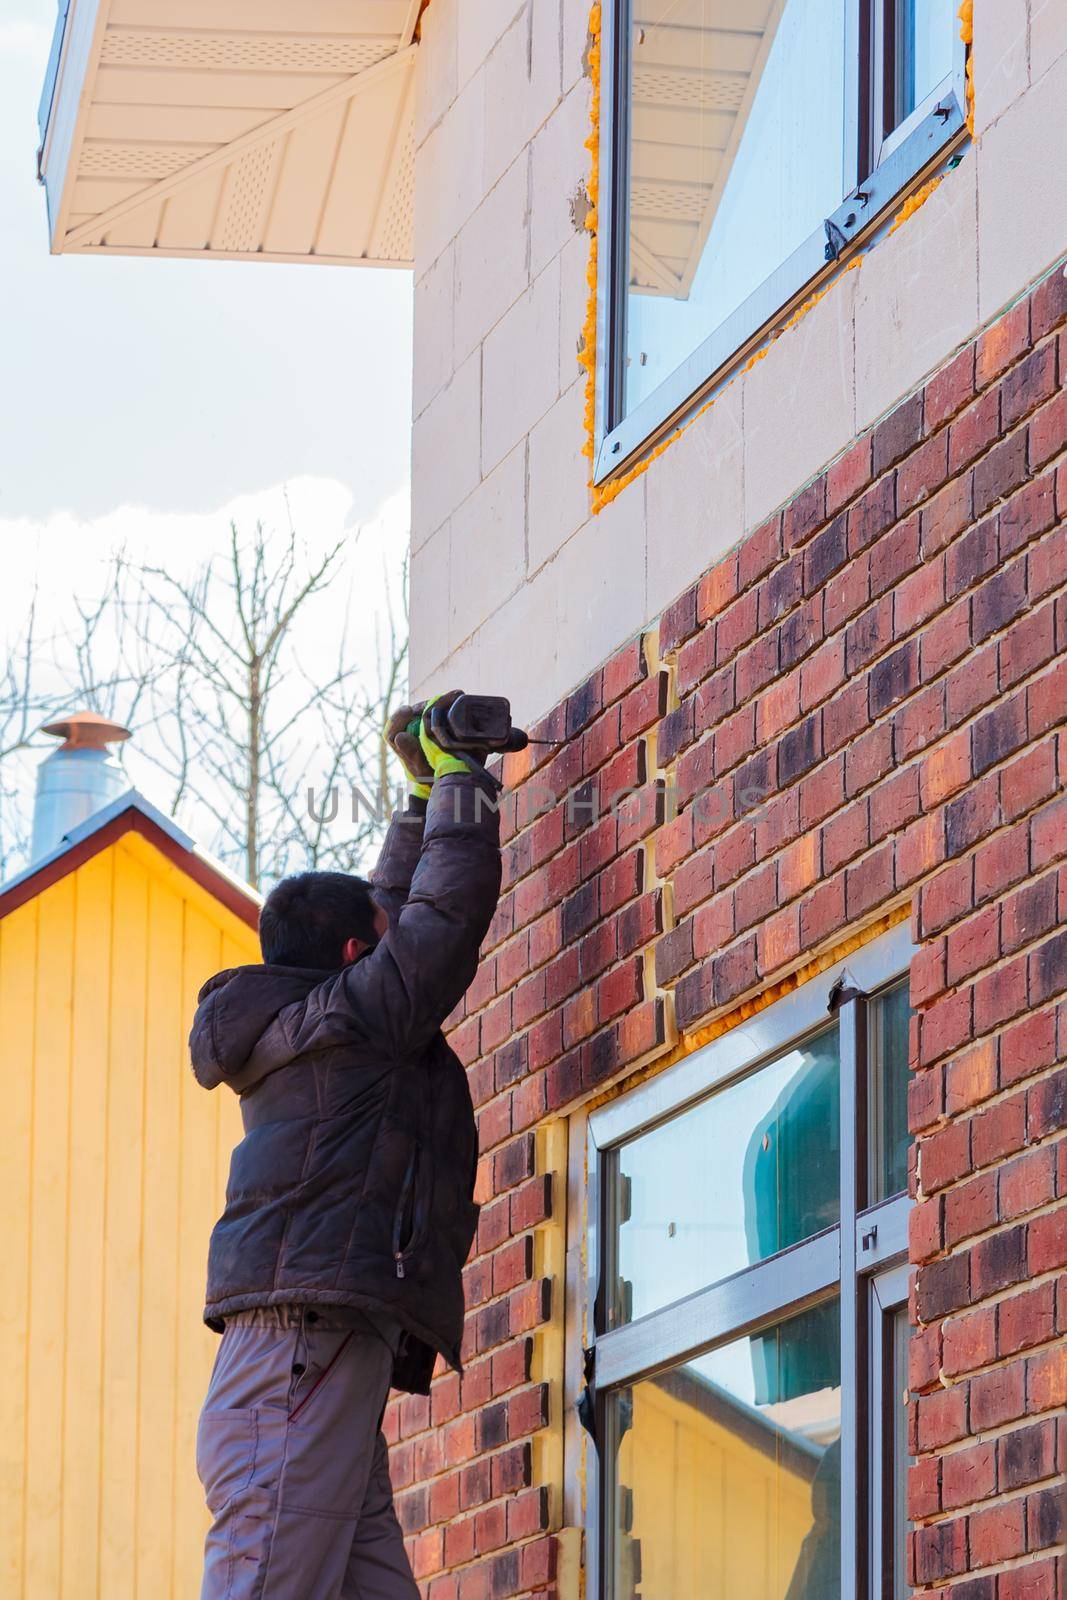 A man works with a drill, attaches thermal panels made of clinker to the facade of the house. Clinker bricks and tiles in brown color